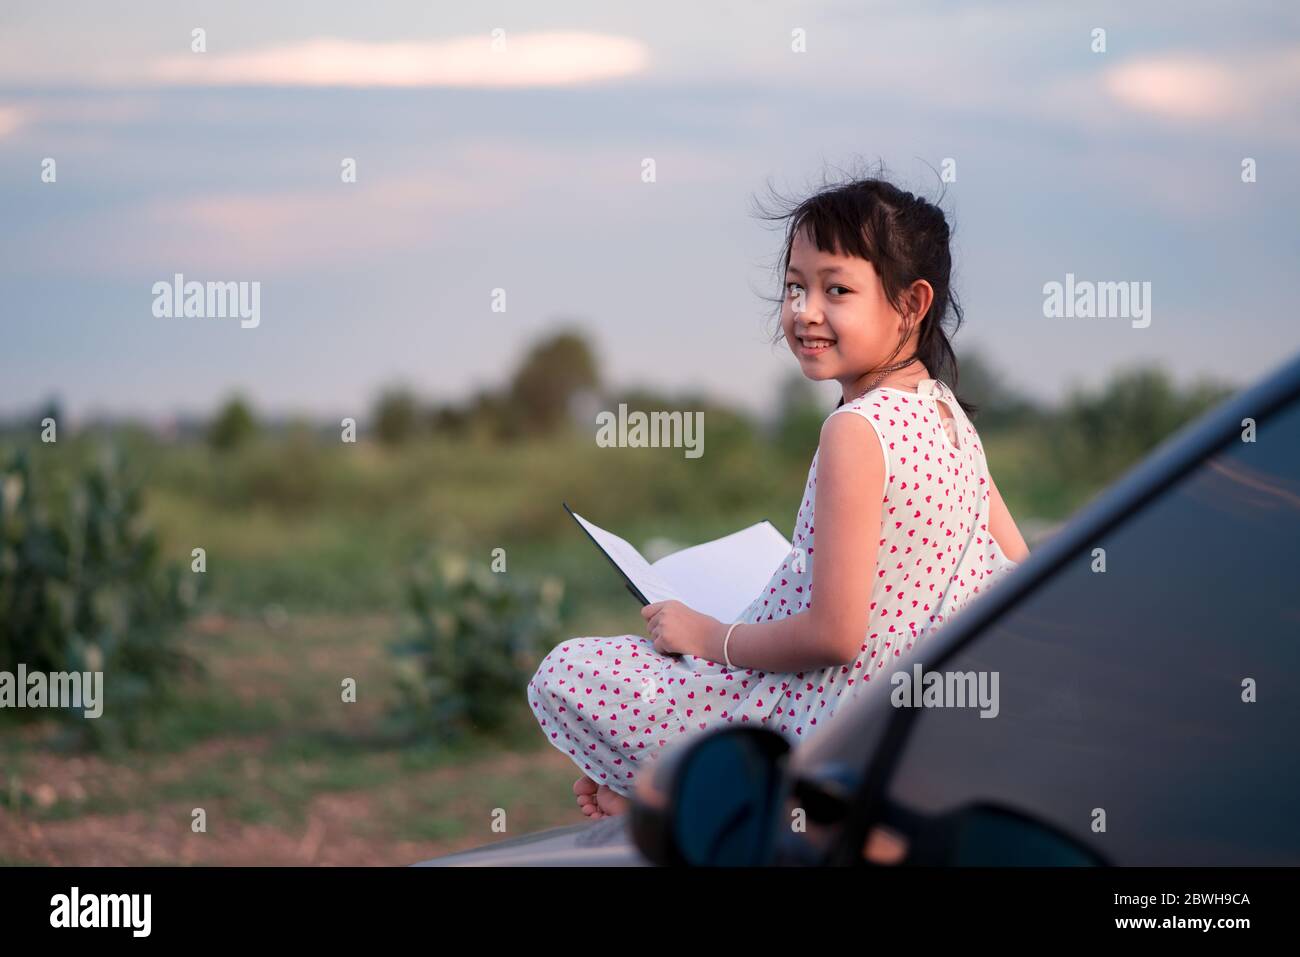 Little child girl  sitting and relaxing on a car reading a book in a green nature background Stock Photo